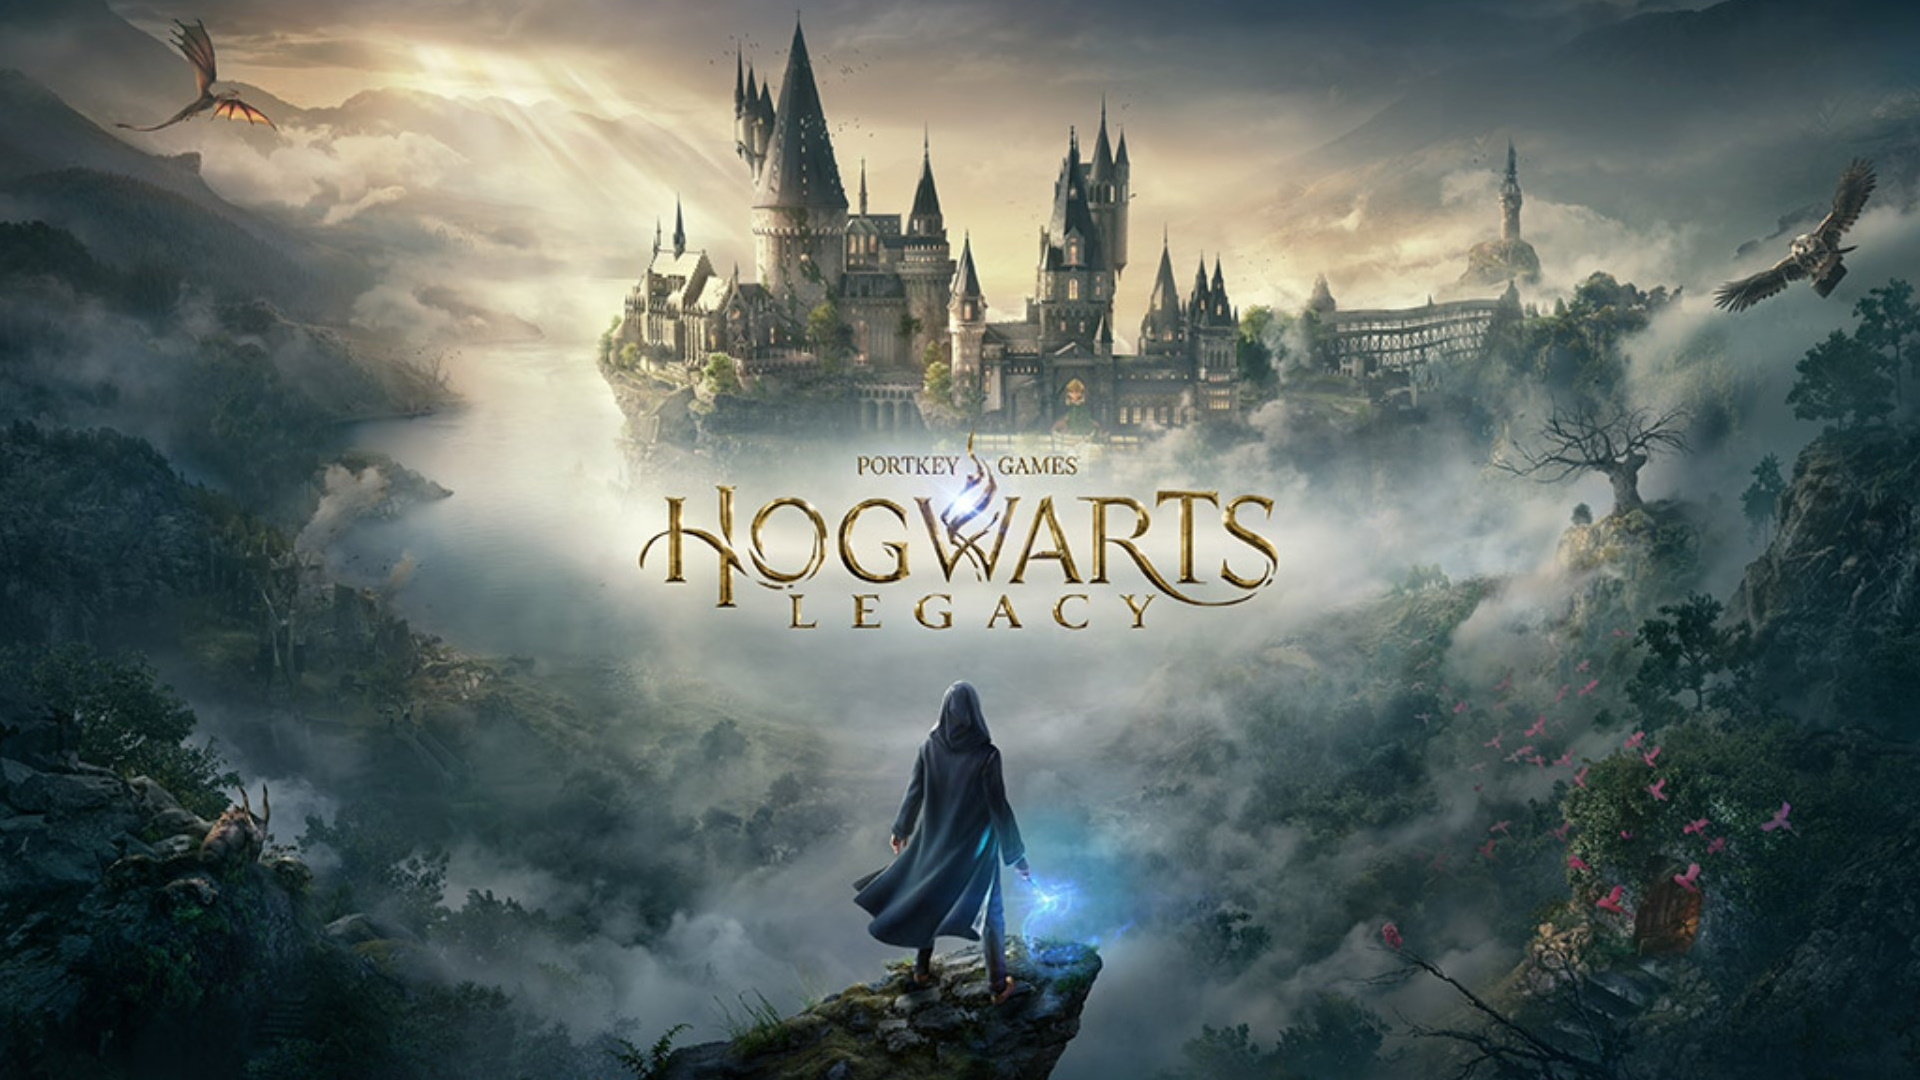 Hogwarts Legacy: Release date, Trailer, Platforms, Story, Gameplay - top most popular games in 2021